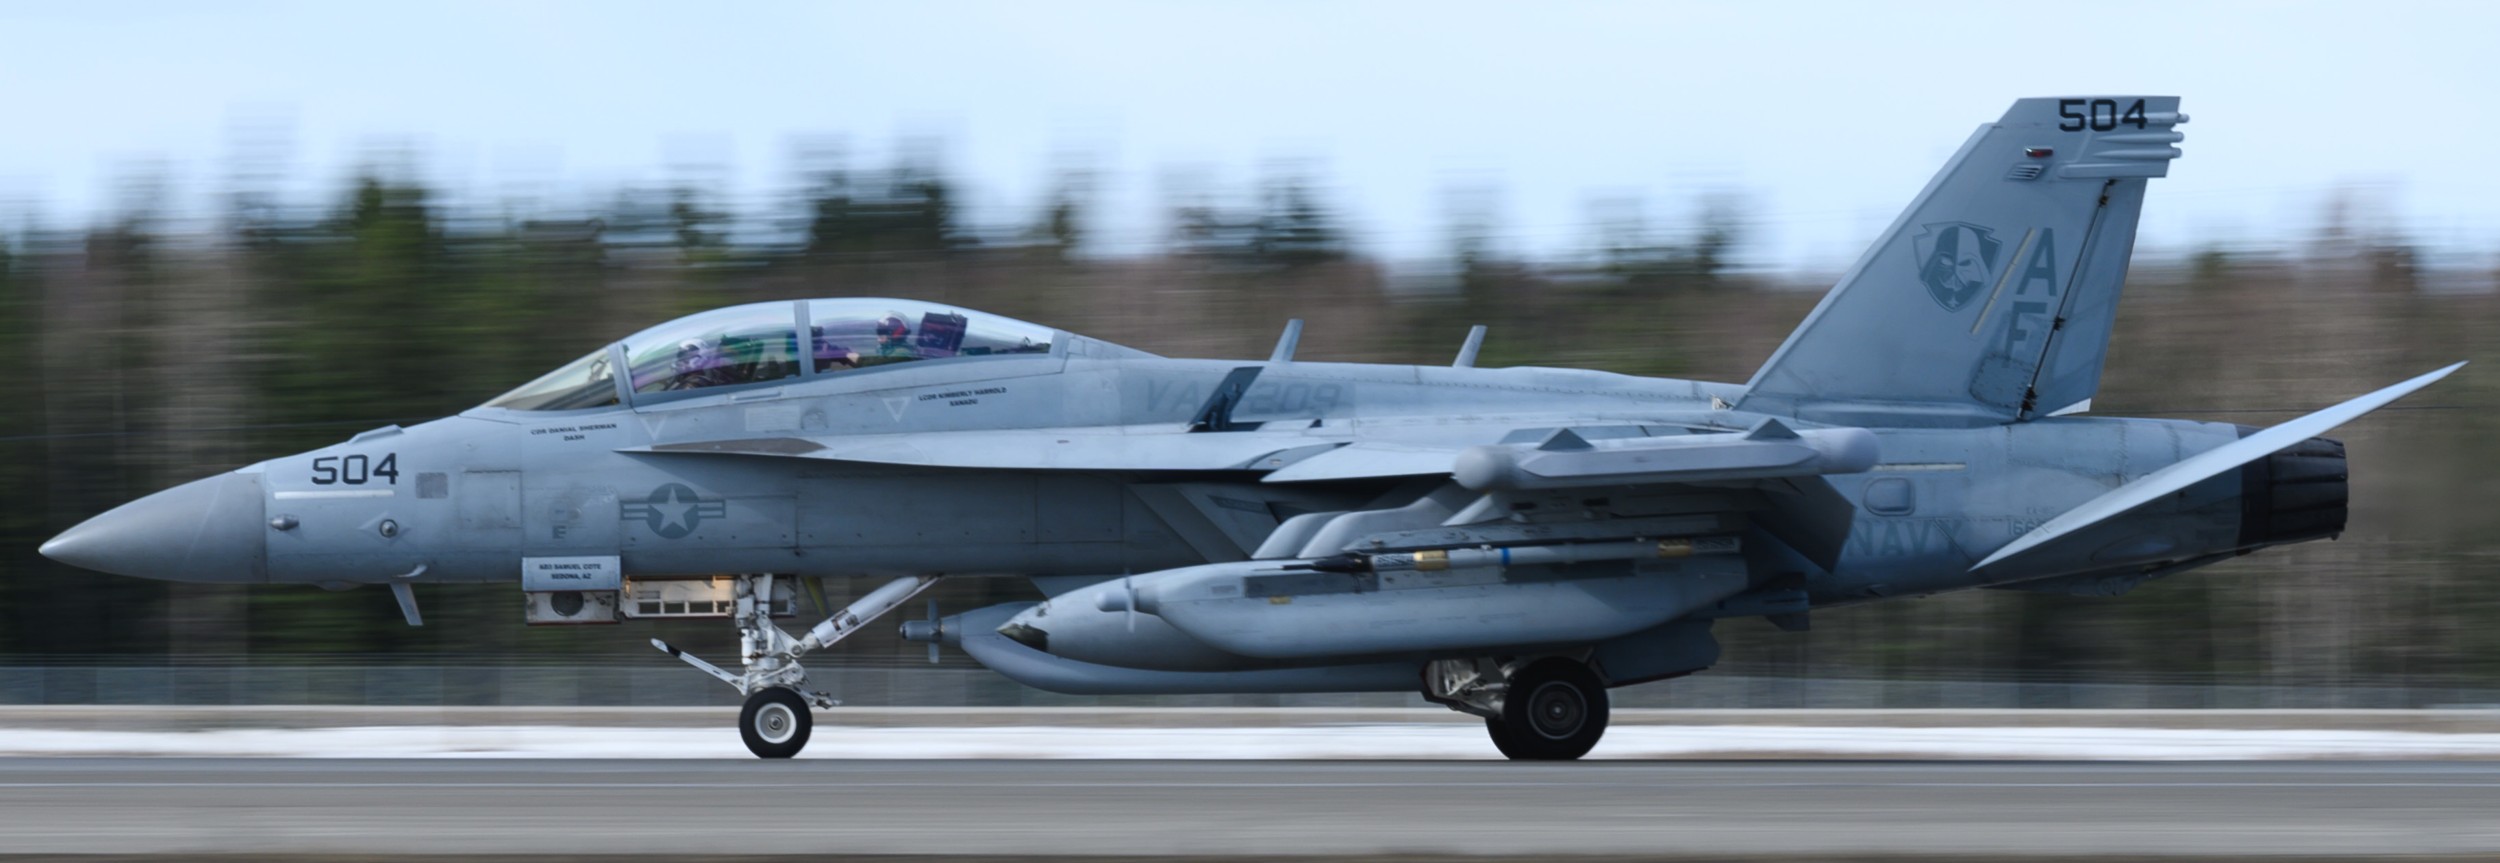 vaq-209 star warriors electronic attack squadron ea-18g growler us navy eielson afb red flag alaska 80